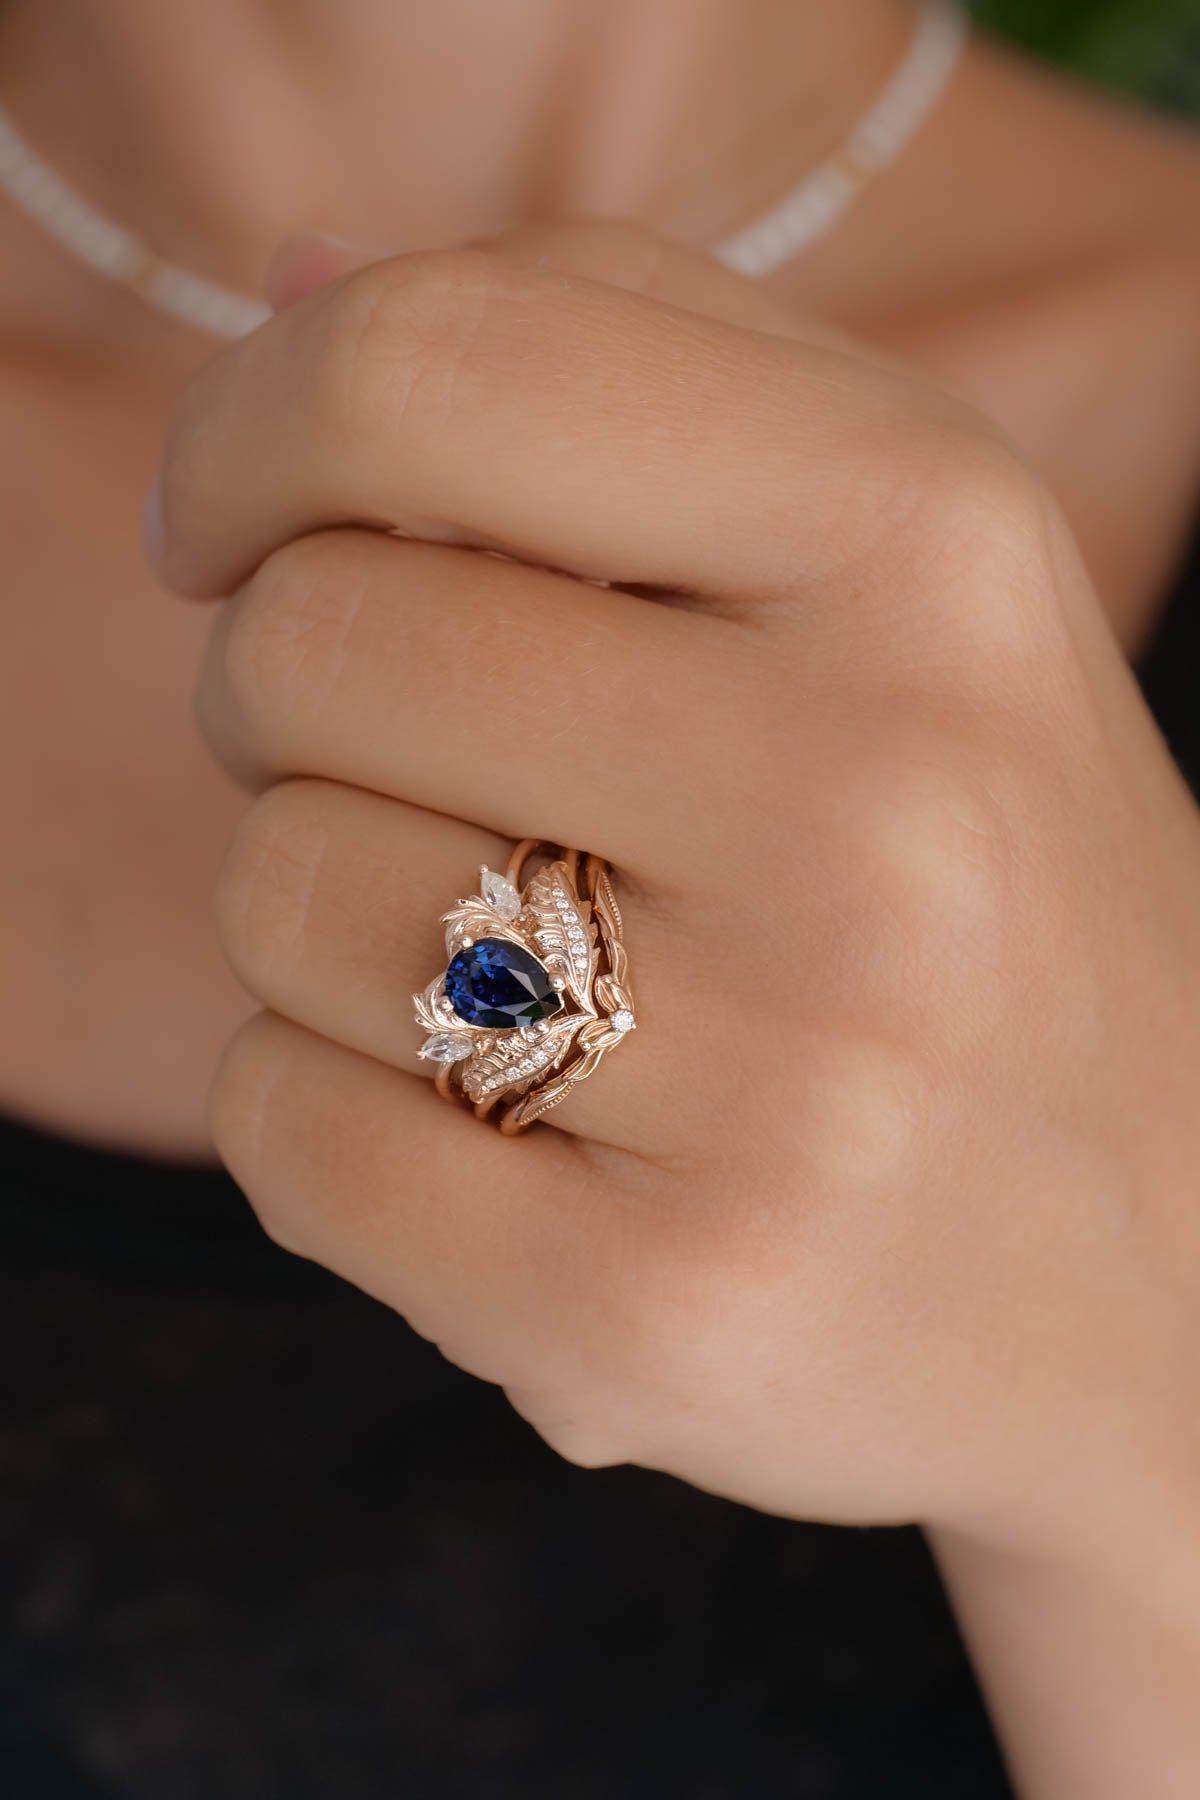 Genuine sapphire bridal ring set, gold engagement and wedding rings set with diamonds / Adonis - Eden Garden Jewelry™